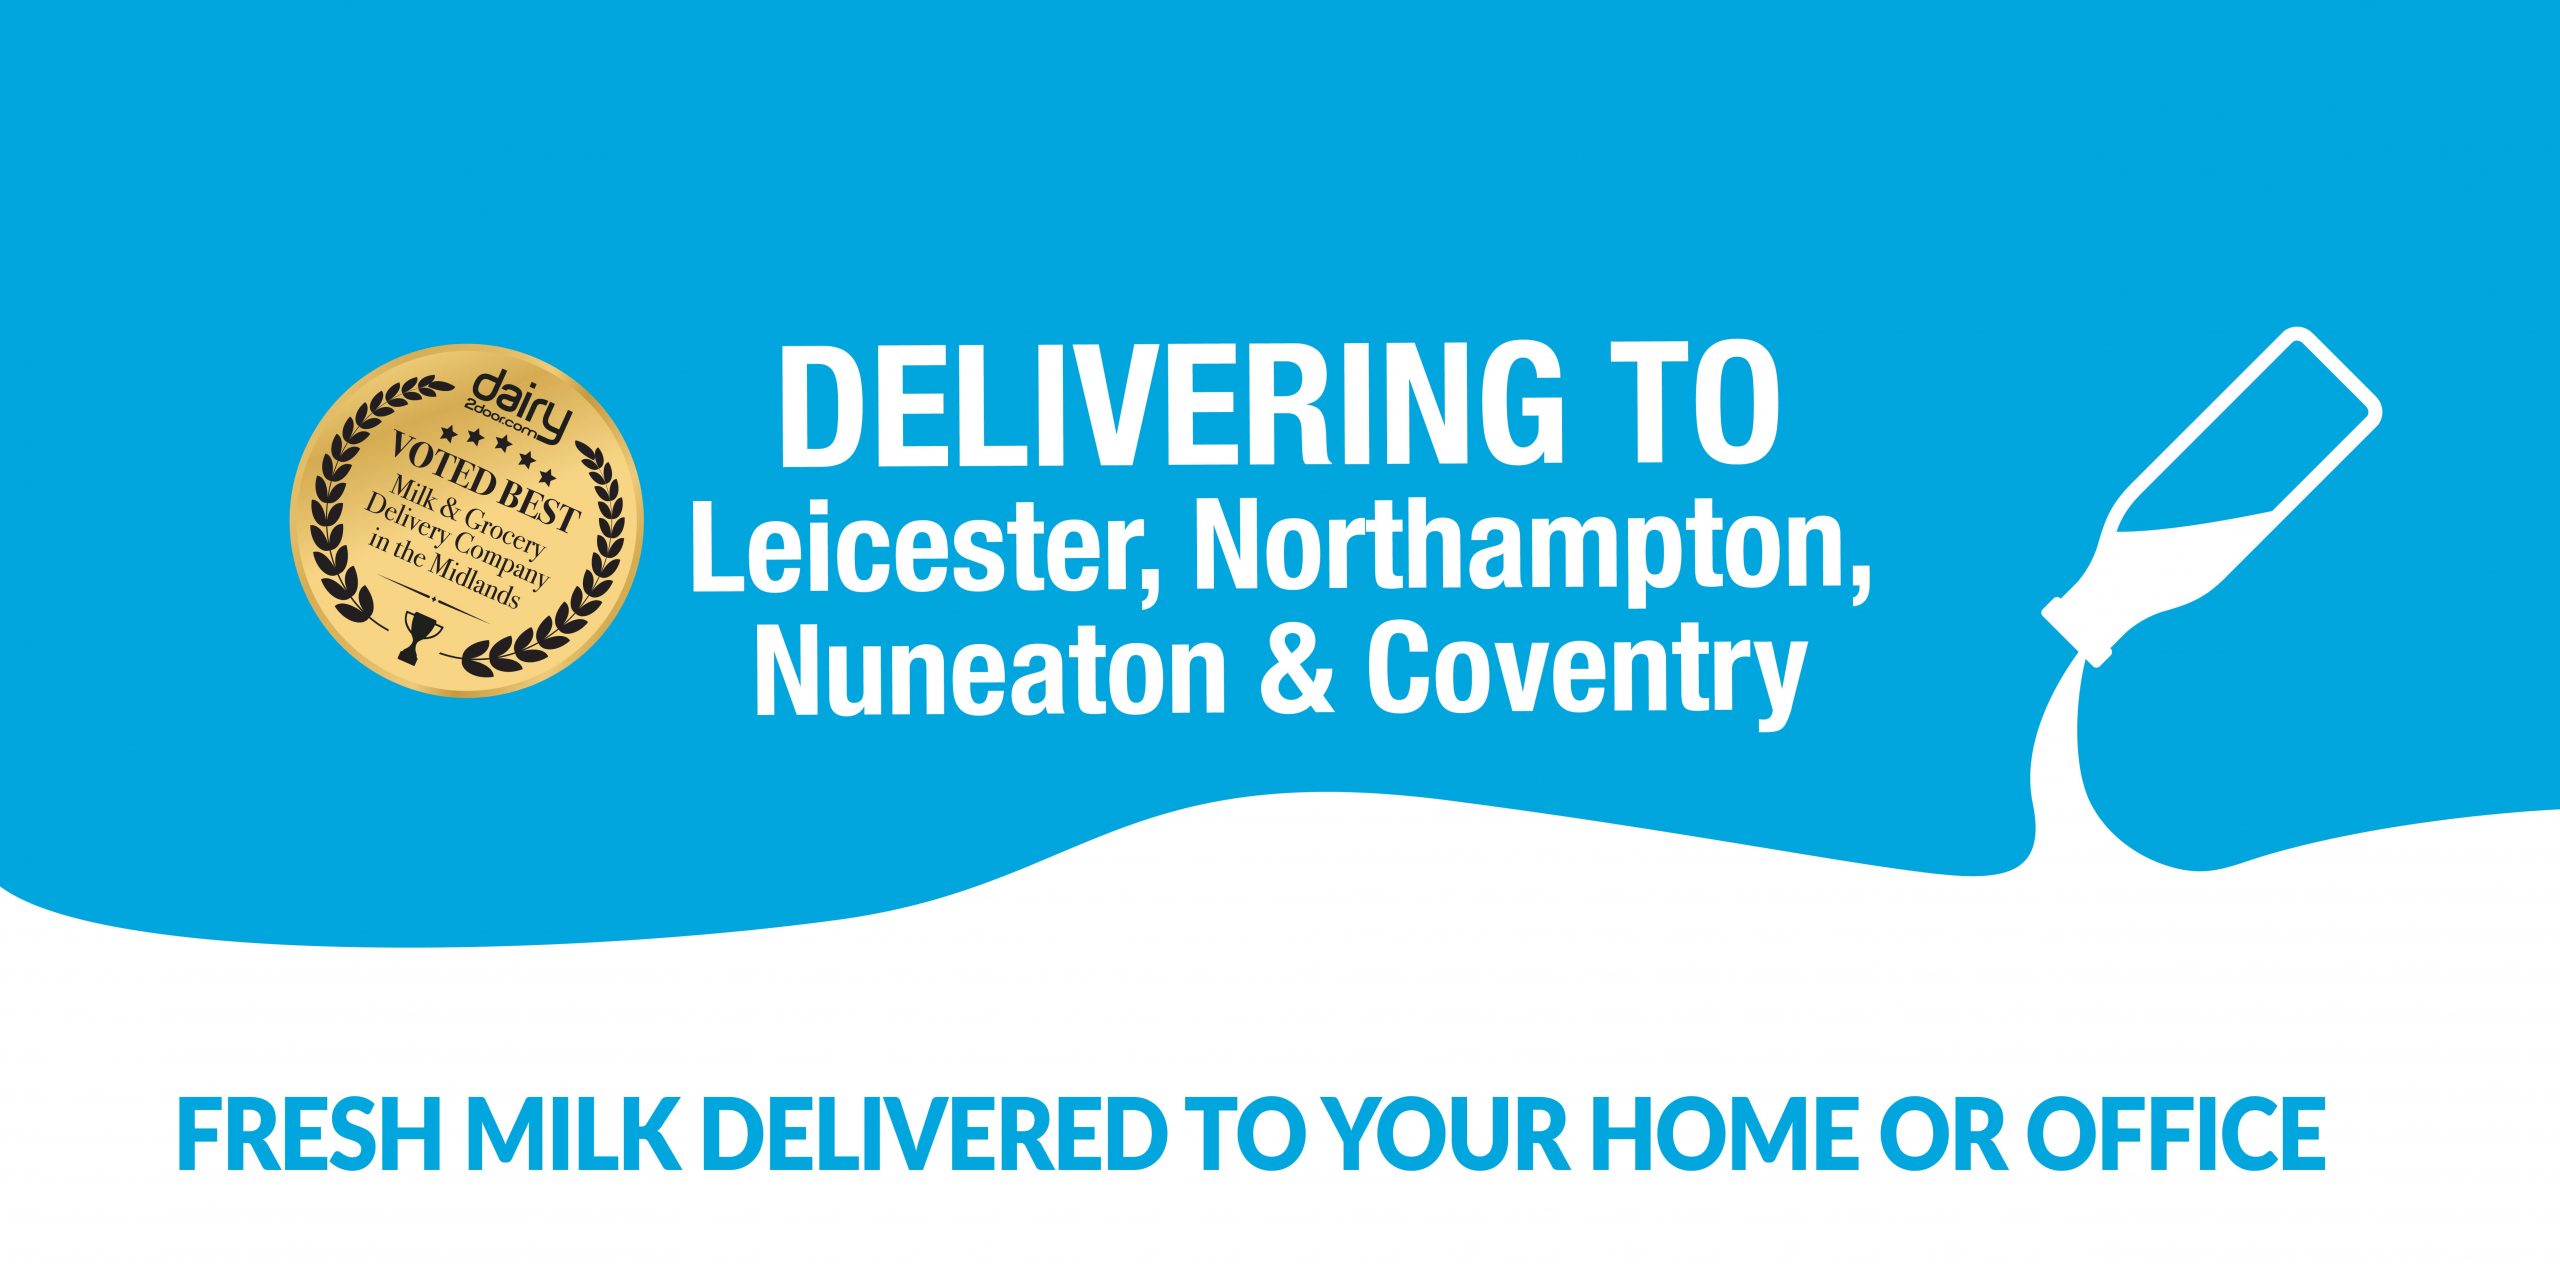 Dairy2Door.com-deliveries, Leicester, Coventry, Nuneaton , Northampton These are the postcodes we deliver to: LE1, LE2, LE3, LE4, LE5, LE6, LE7, LE8, LE9, LE10, LE11, LE12, LE16, LE17, LE18, LE19, LE67 NN2, NN3, NN6, NN7, NN11, CV1, CV2, CV3, CV4, CV5, CV6, CV10, CV11, CV12, CV13